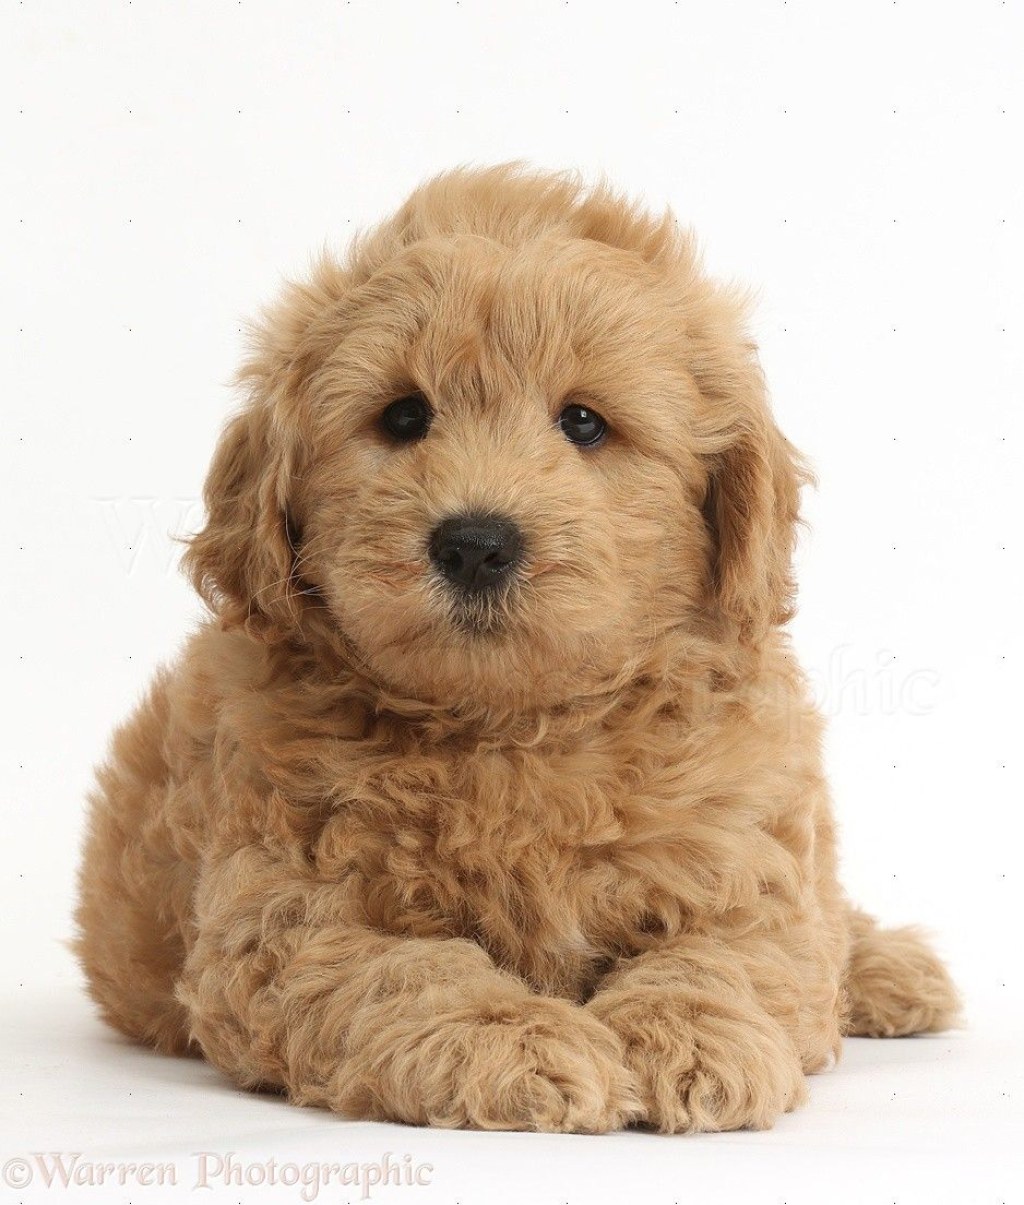 Picture of: Dog: Cute Fb Goldendoodle puppy photo  Goldendoodle puppy, Fb